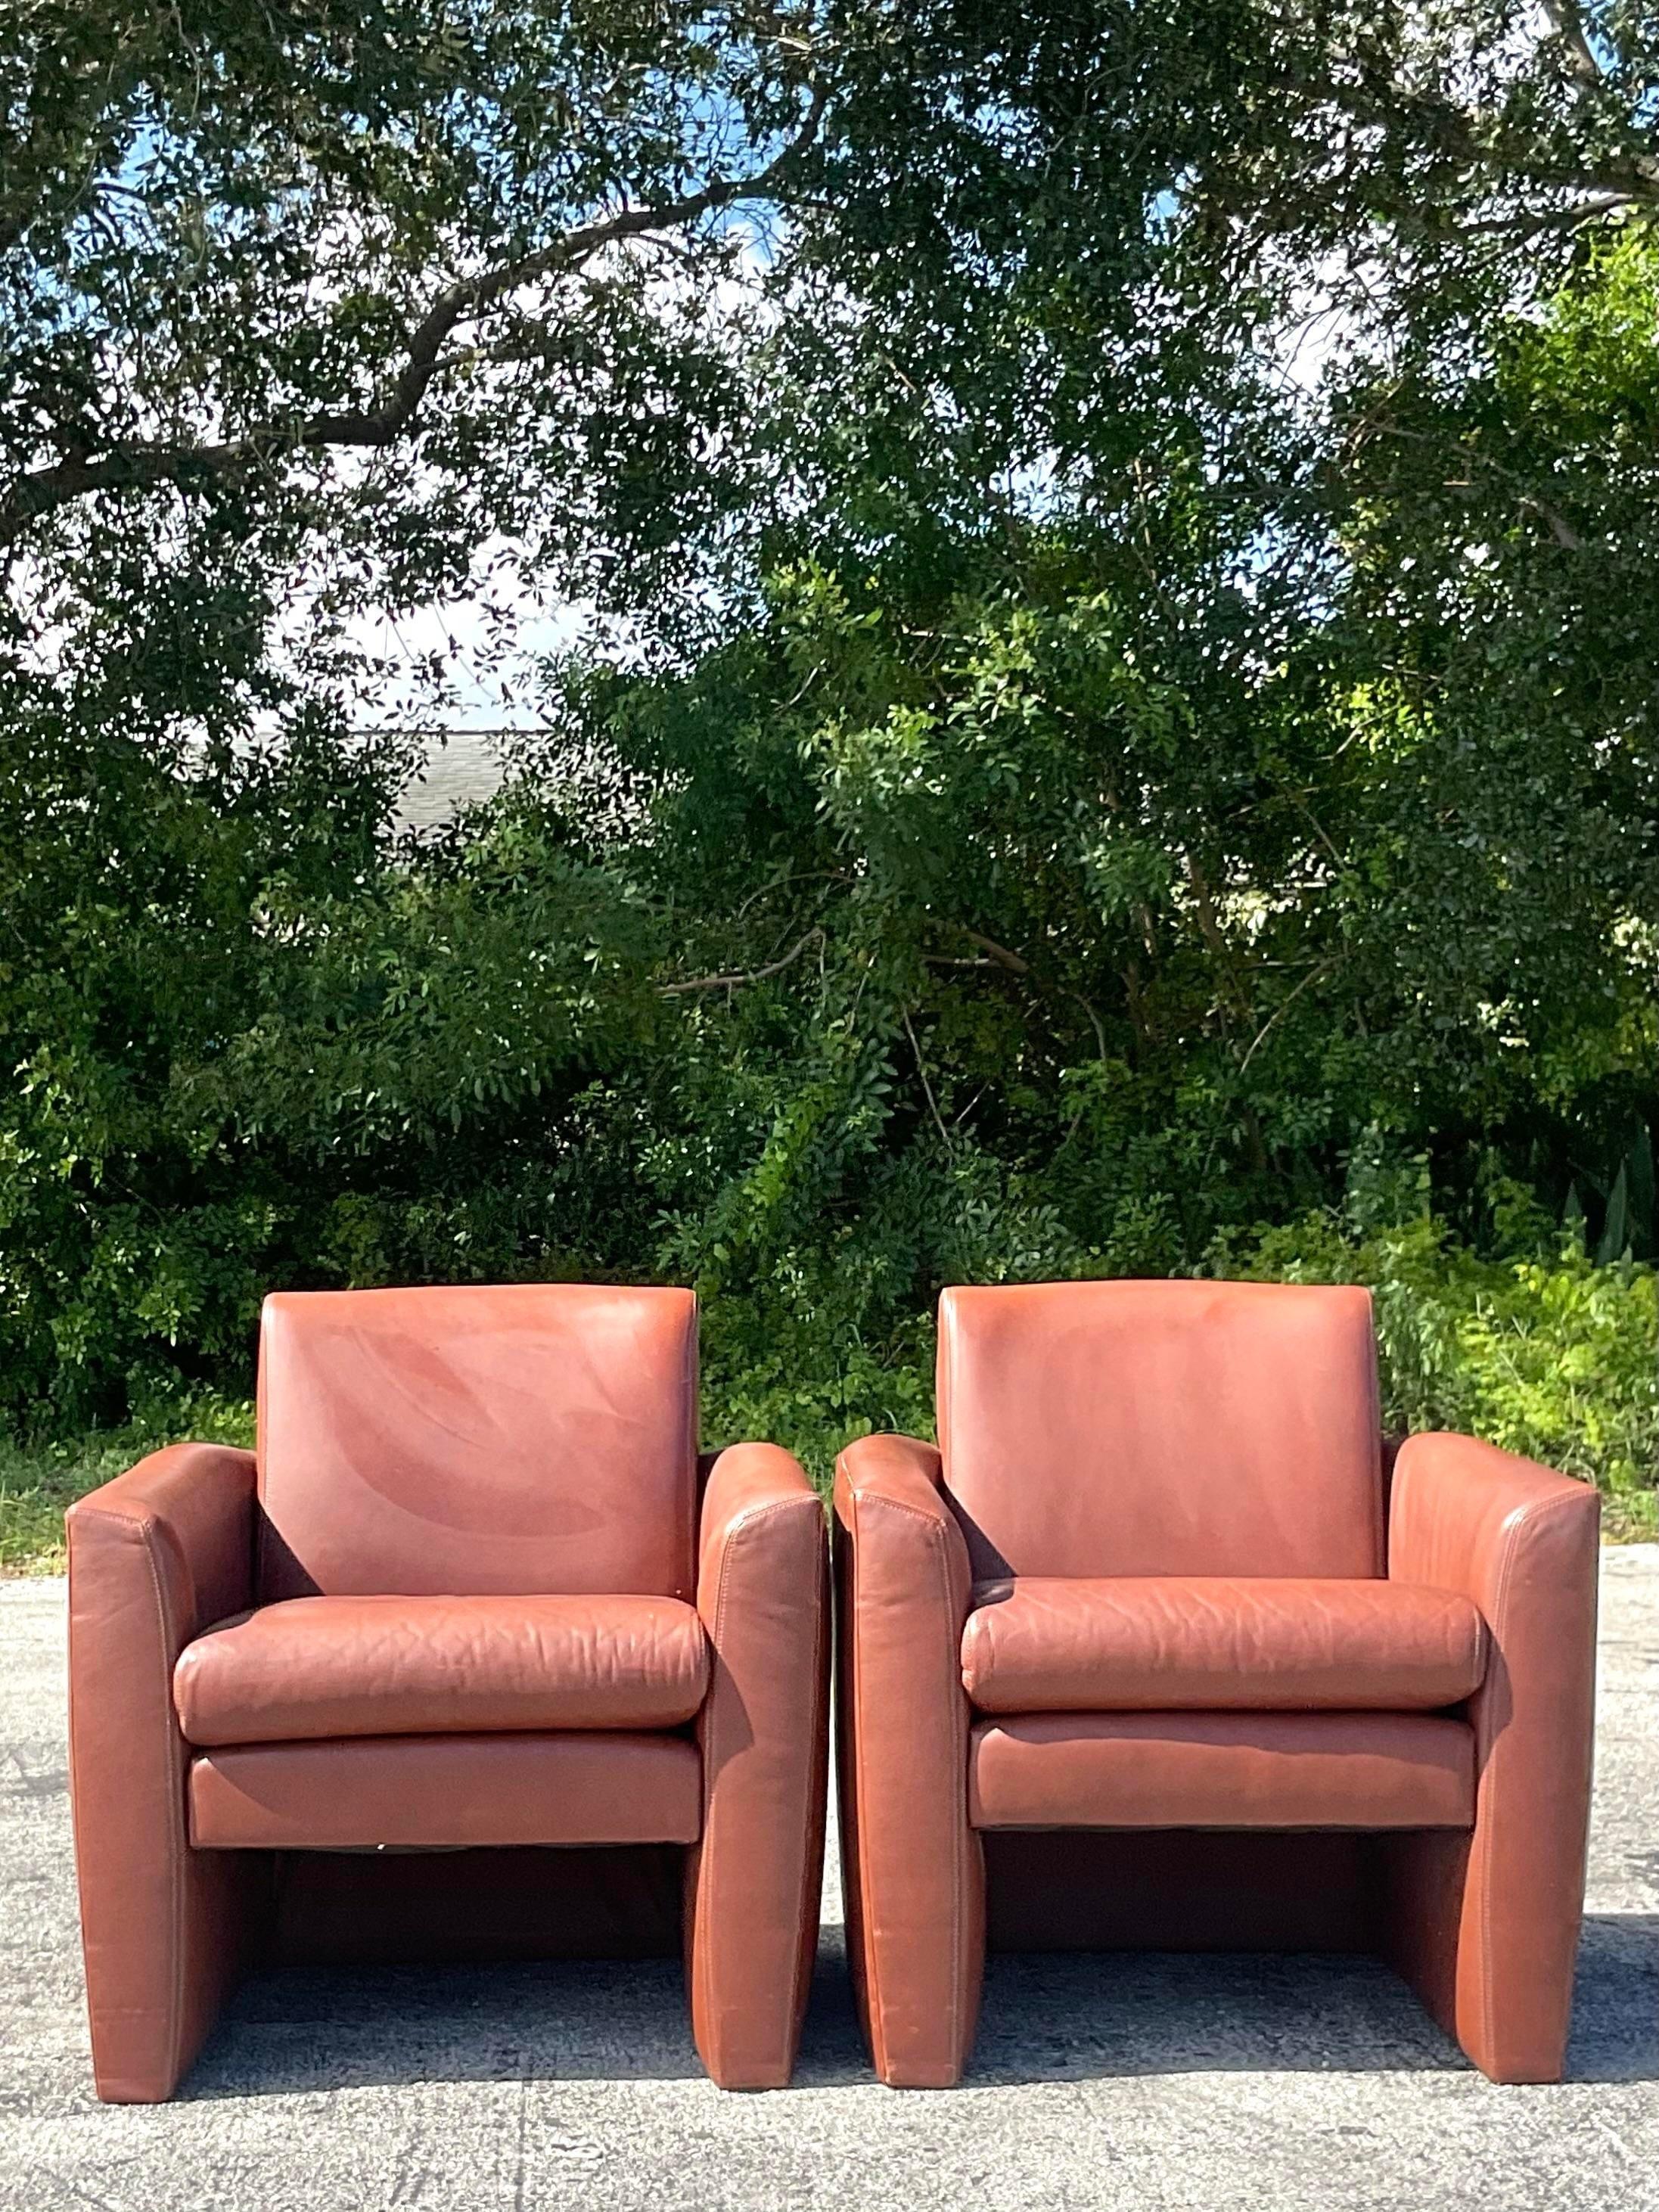 An exceptional pair of vintage Boho Club chairs. Made by the iconic Directional group and tagged below the seat. Incredible Cognac leather on a clean and modern shape. Two pairs available on my page. Acquired from a Palm Beach estate.